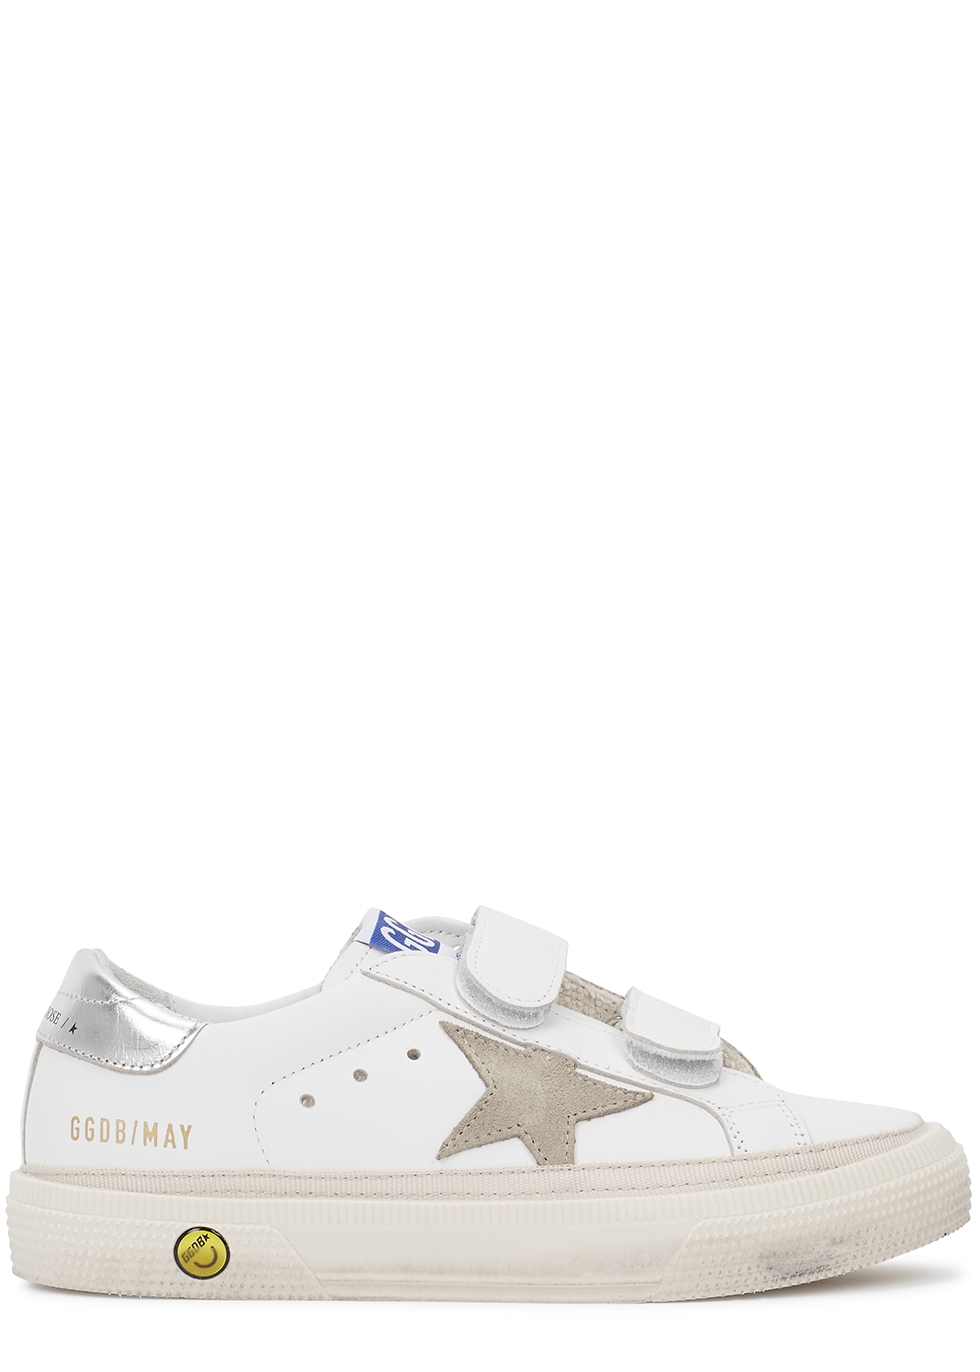 IT28-IT35 KIDS May School white leather sneakers Harvey Nichols Shoes Flat Shoes School Shoes 